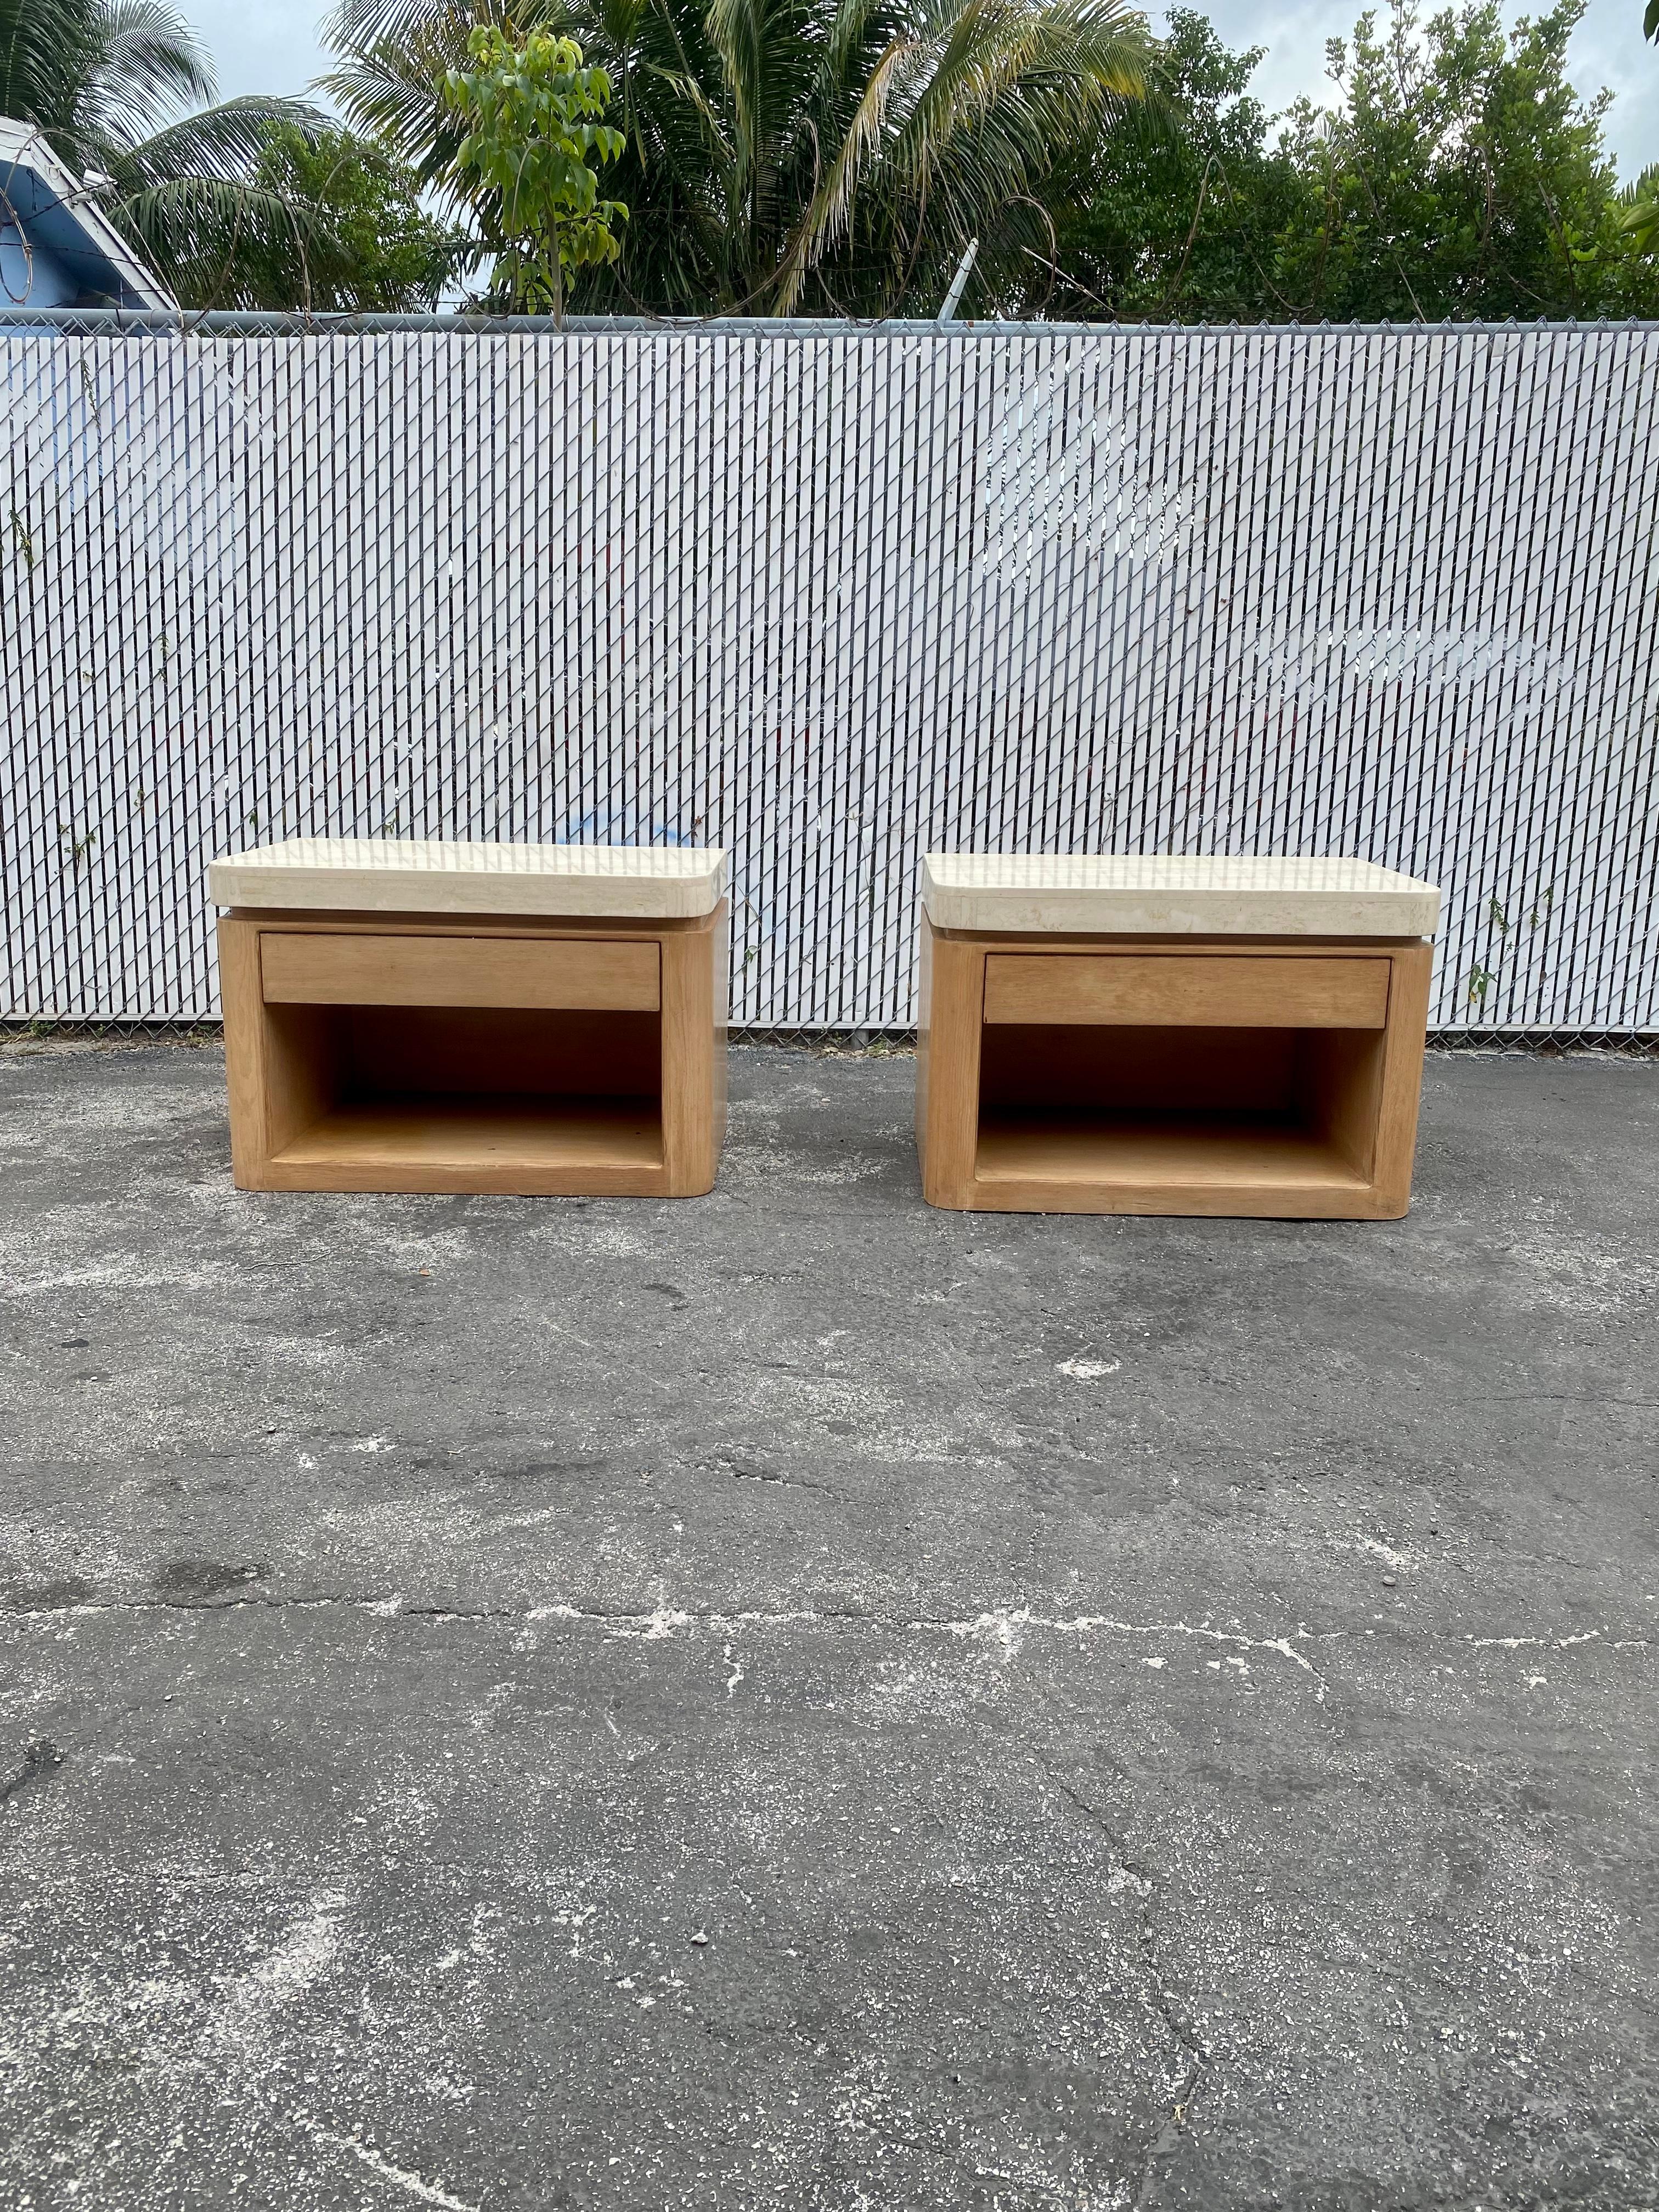 On offer on this occasion is one of the most stunning, travertine and oak night stands or end tables you could hope to find. This is an ultra-rare opportunity to acquire what is, unequivocally, the best of the best, it being a most spectacular and